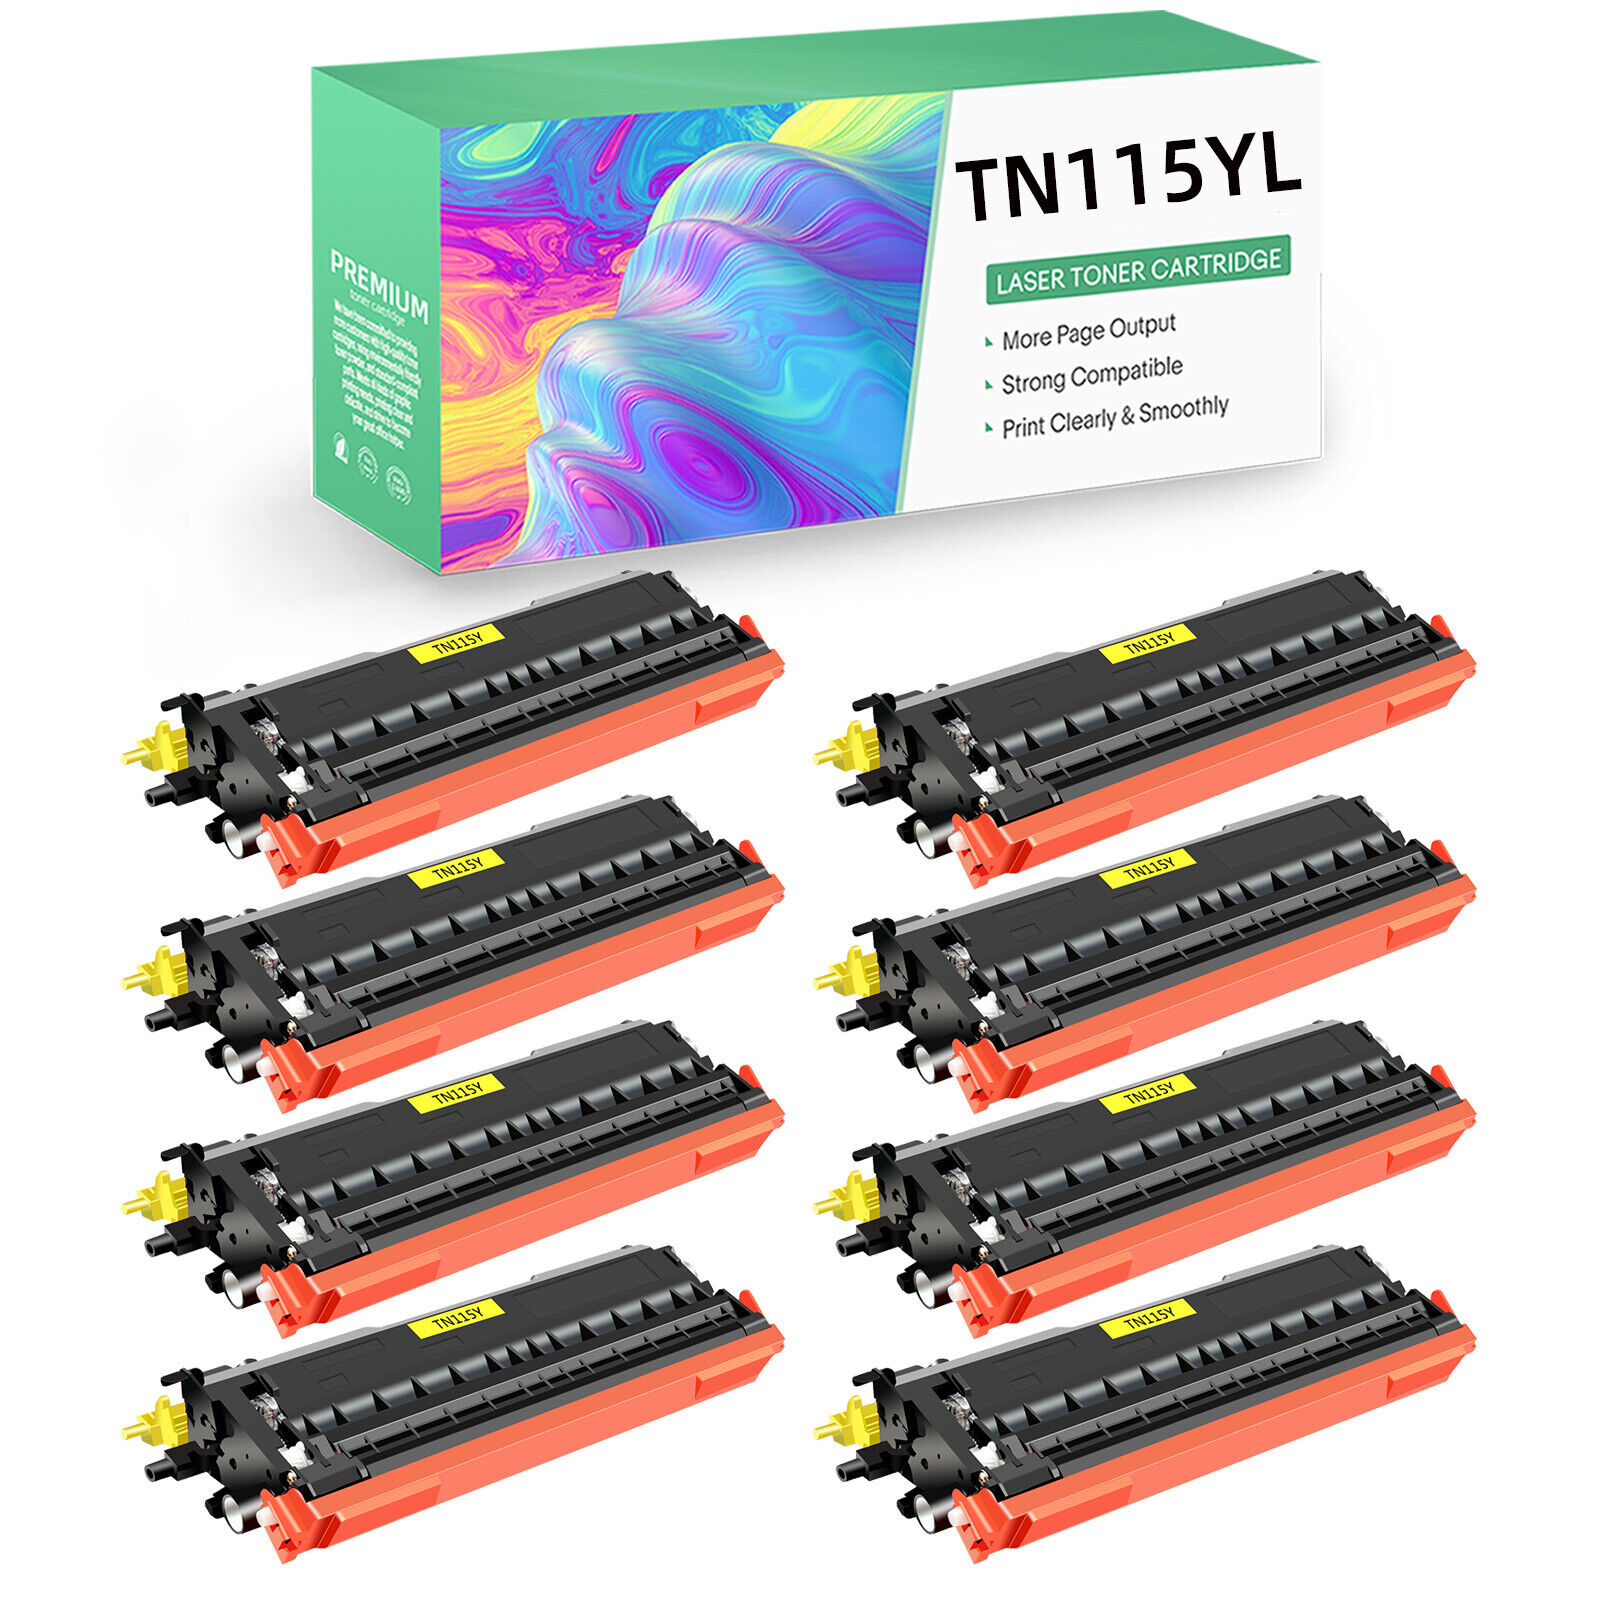 8PK High Yield TN115 Yellow Toner Cartridge Compatible for Brother MFC-9440 9840